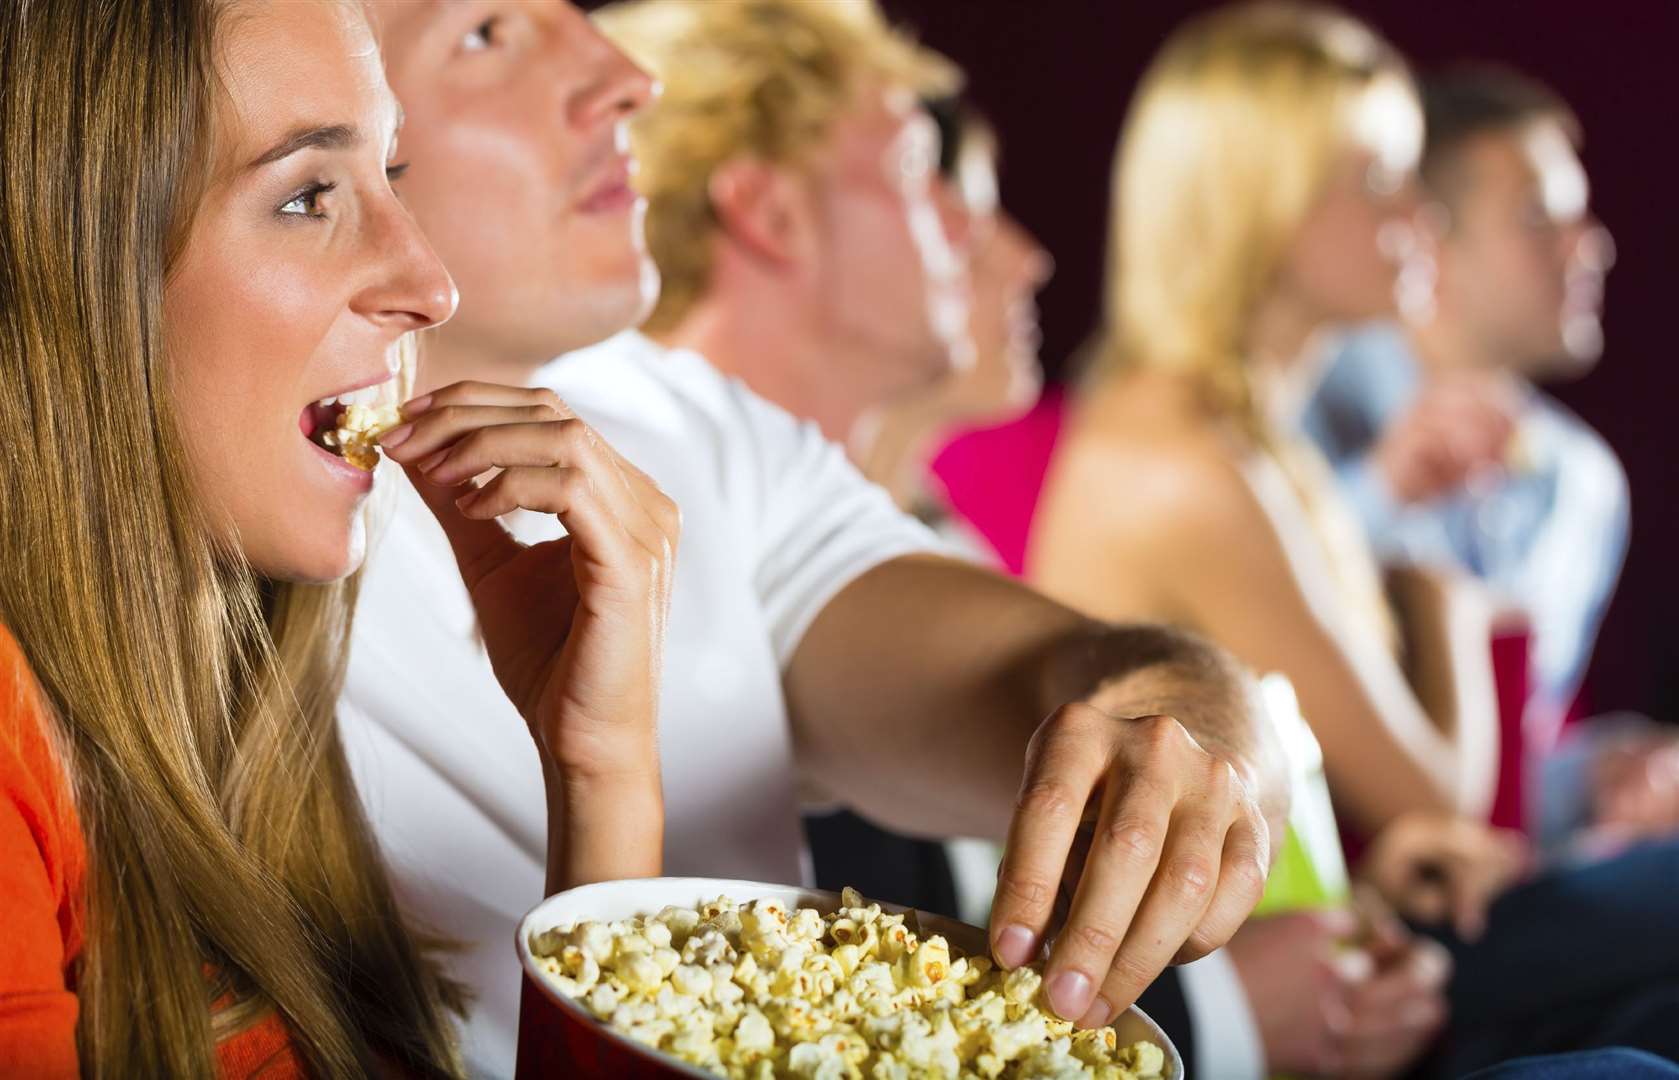 Tickets are £3 at numerous cinemas across the country. Image: iStock.